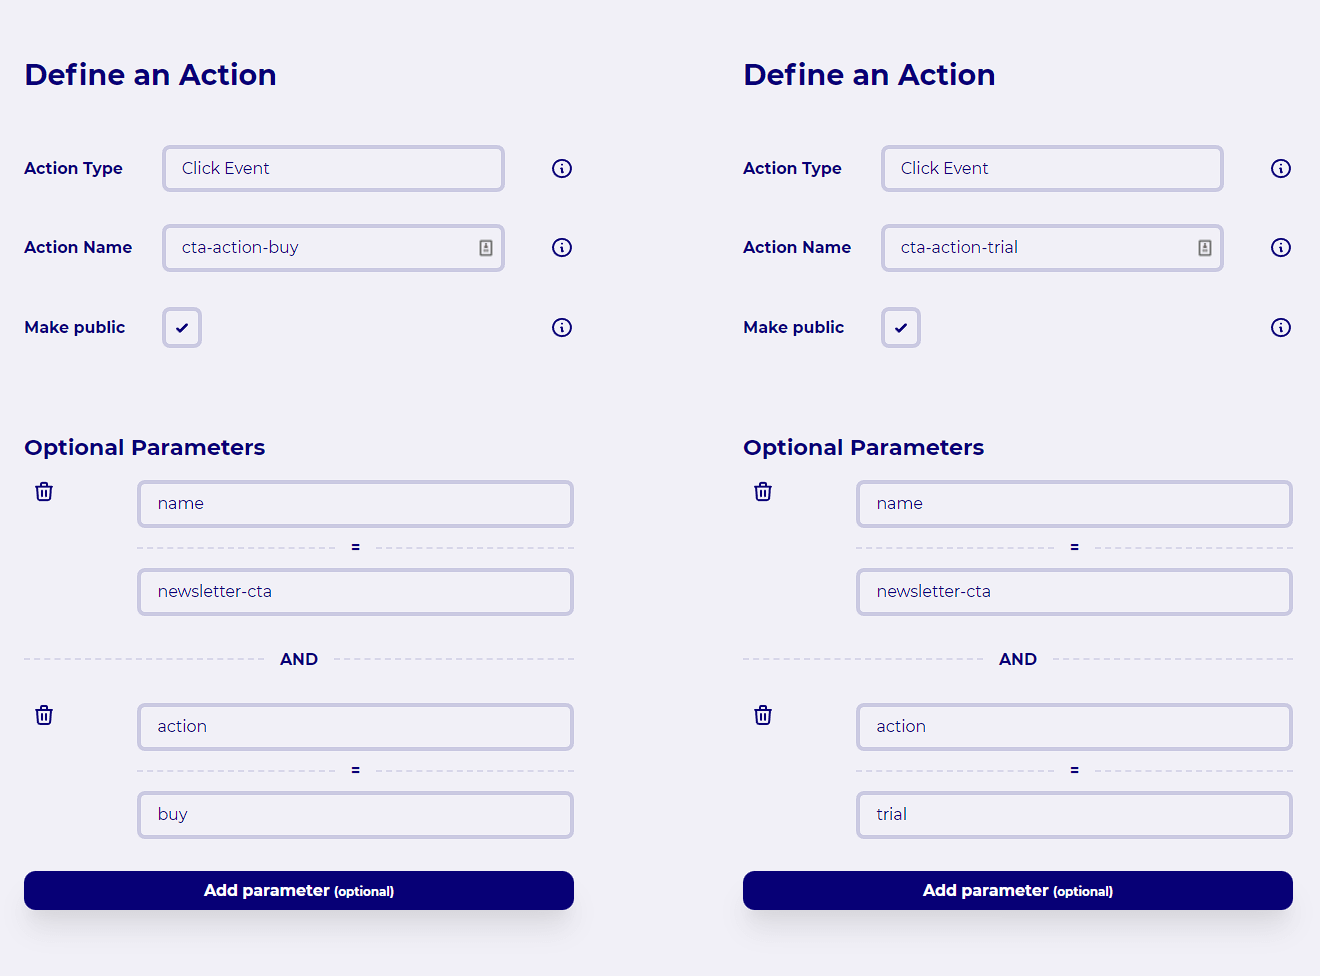 Create two Custom Event action filters for comparison